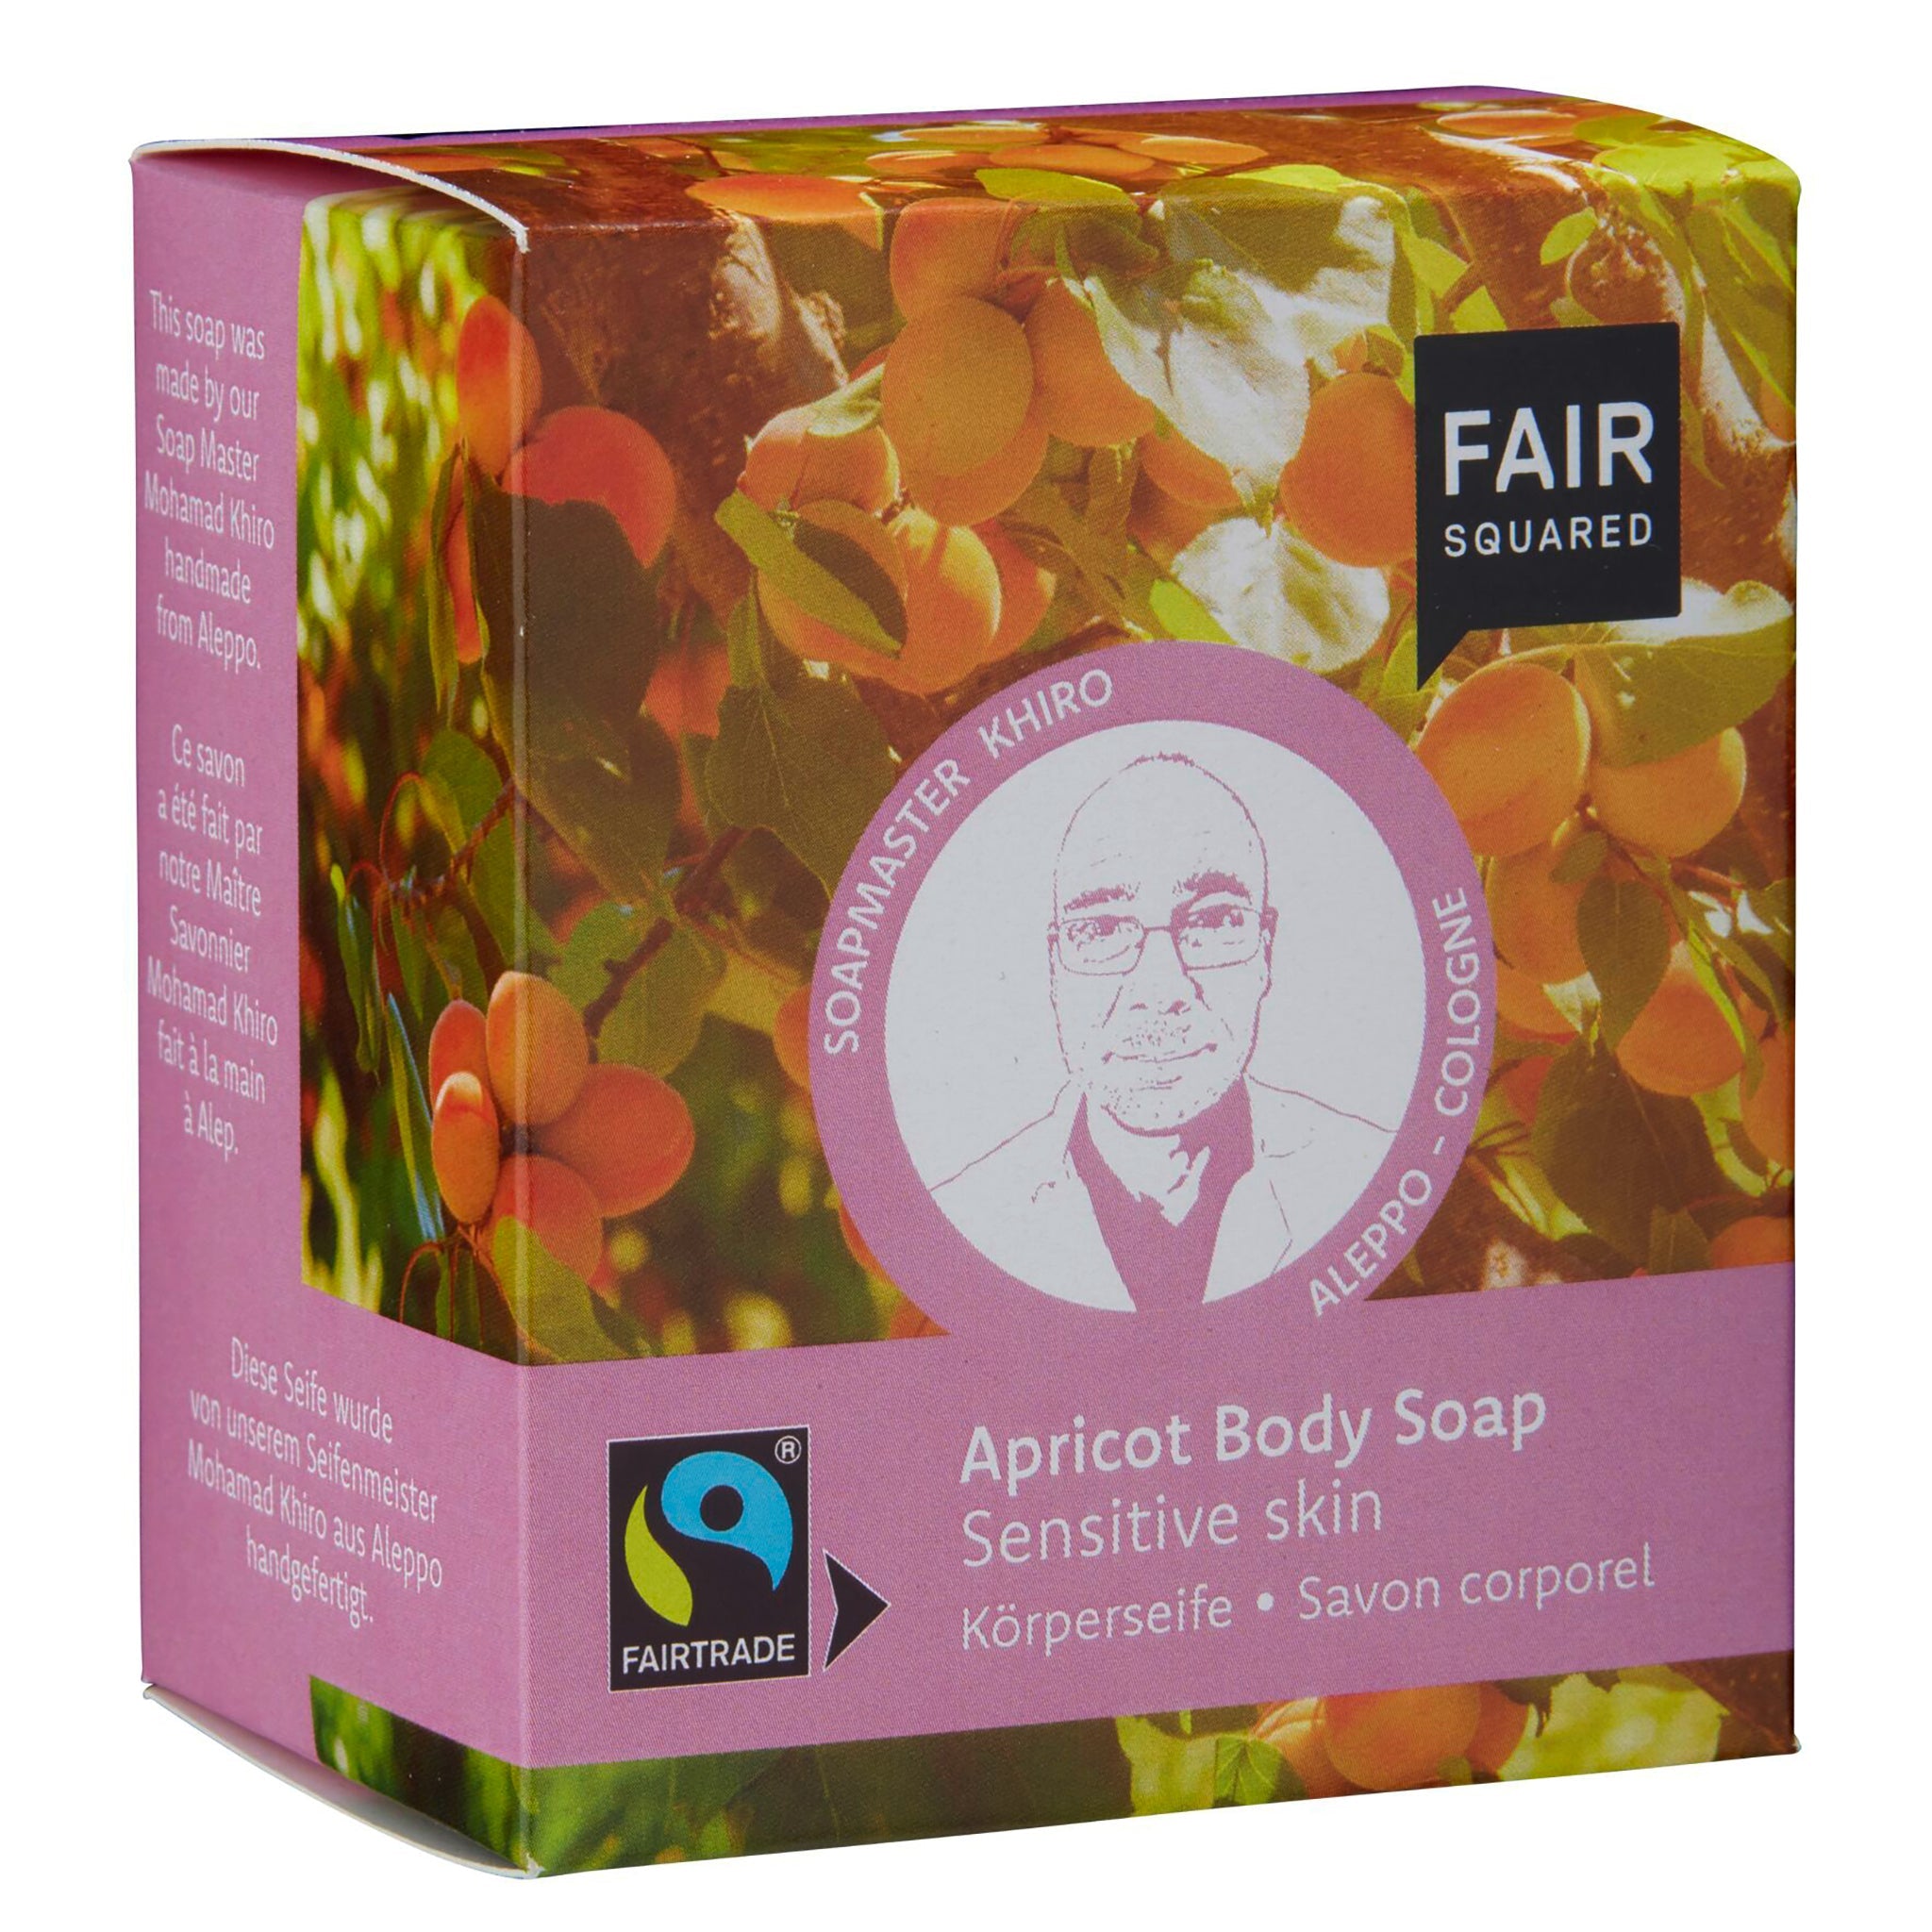 Apricot Body Soap with Cotton Soap Bag - For Sensitive Skin - mypure.co.uk